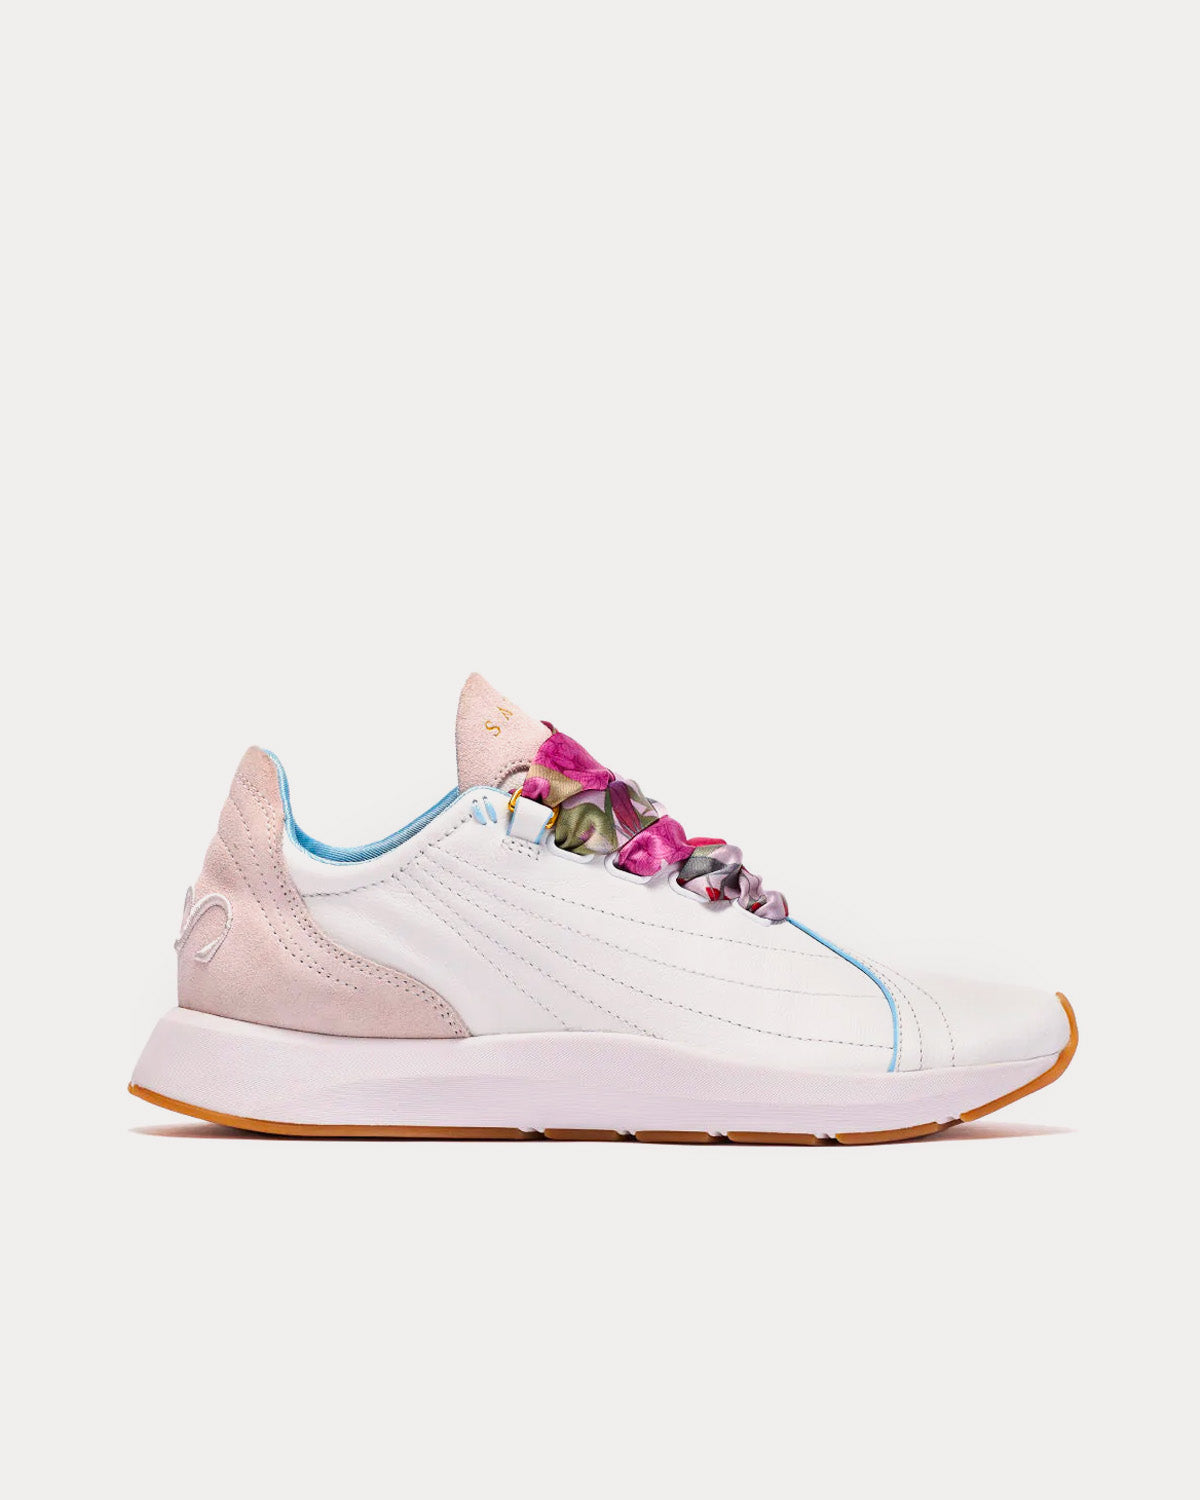 Saysh - Two White / Pink Low Top Sneakers